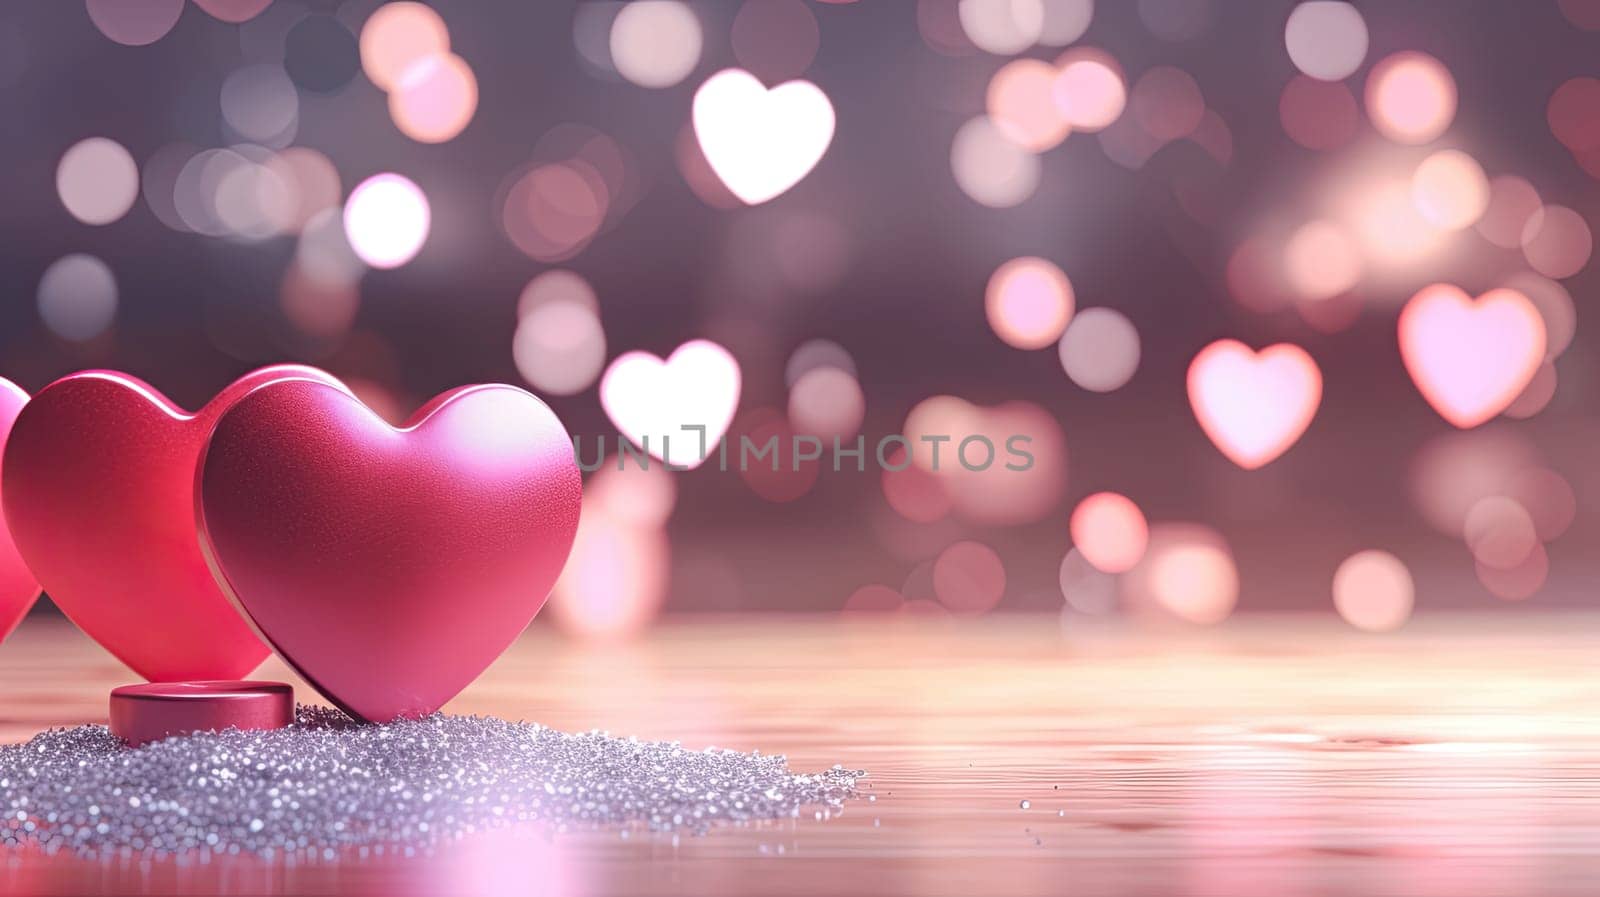 Pink hearts over a wooden table with blurred background and copy space. Love and san valentine background concept by papatonic